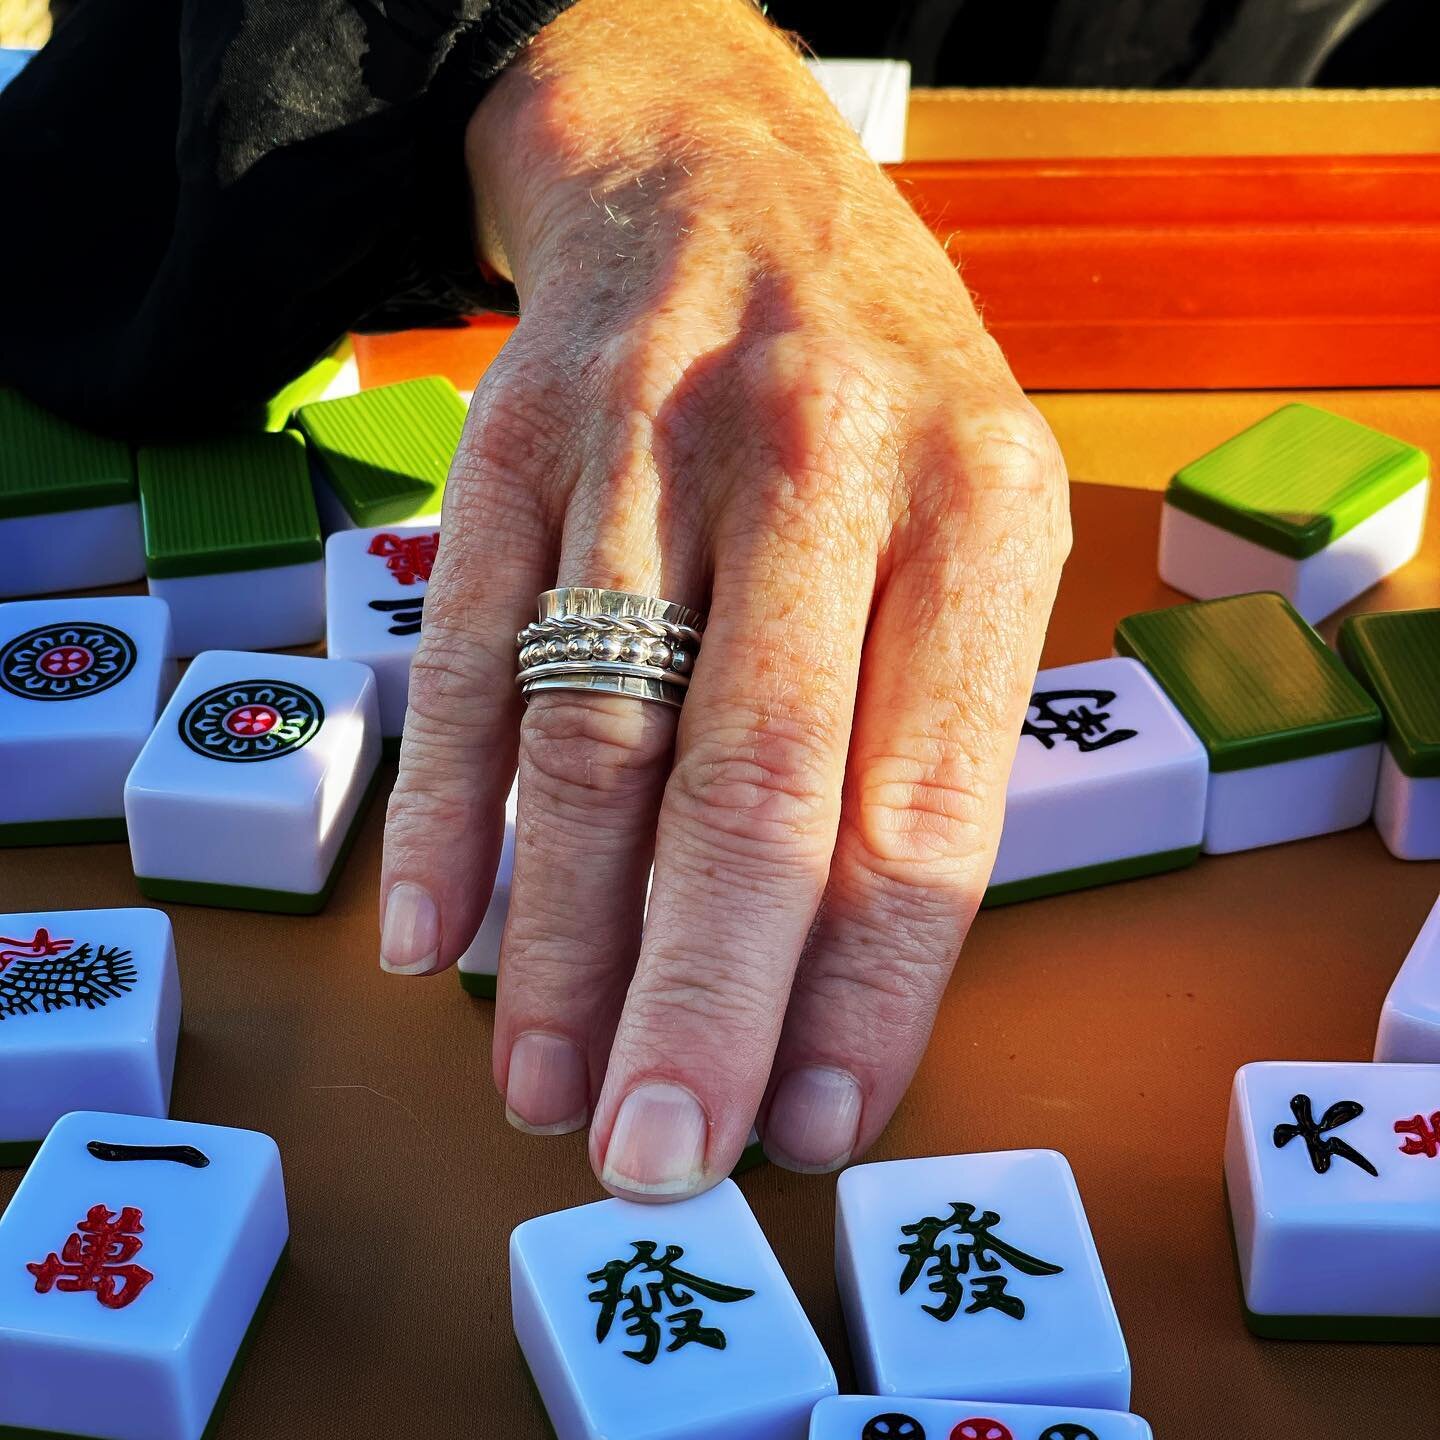 Mahjong time. Let&rsquo;s hope my friend&rsquo;s new Spinner Ring brings luck.